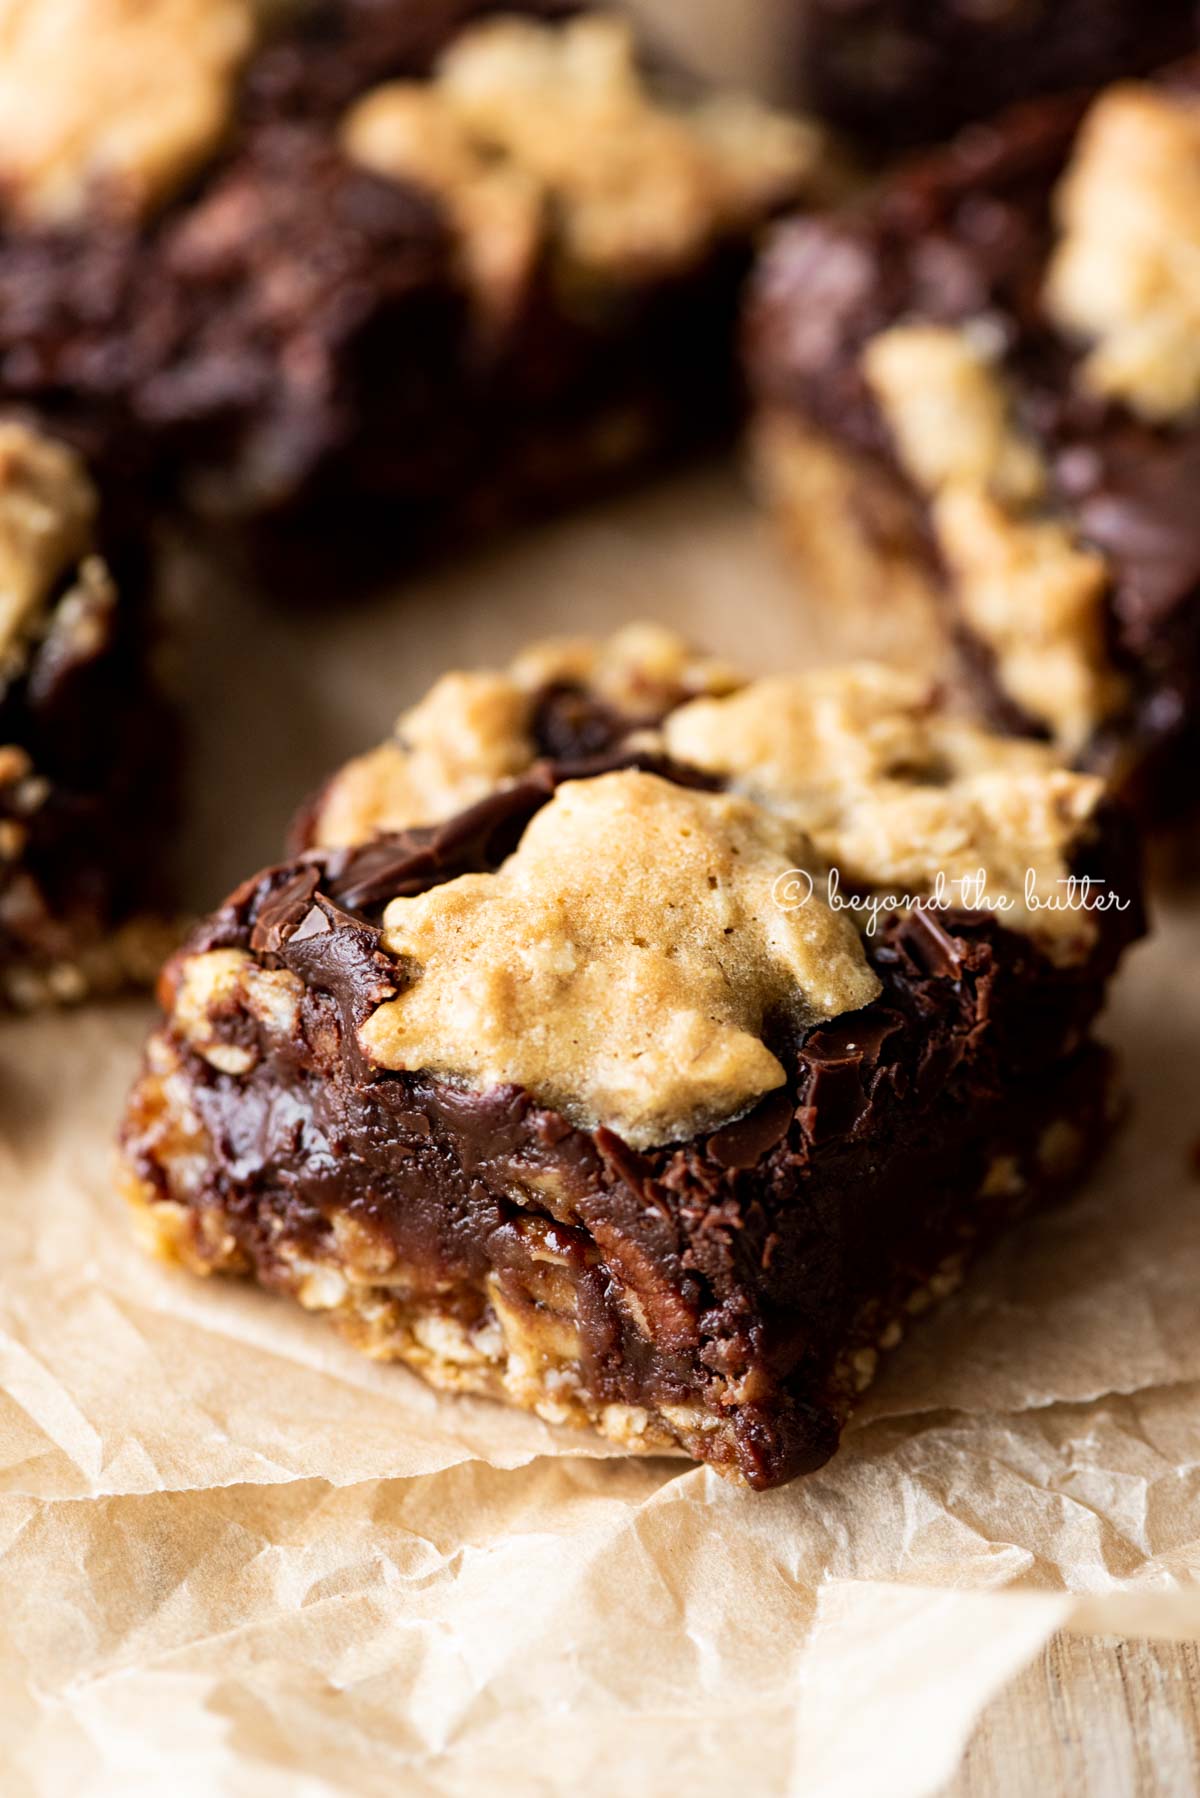 Classic fudge nut bars on parchment paper | All Images © Beyond the Butter®